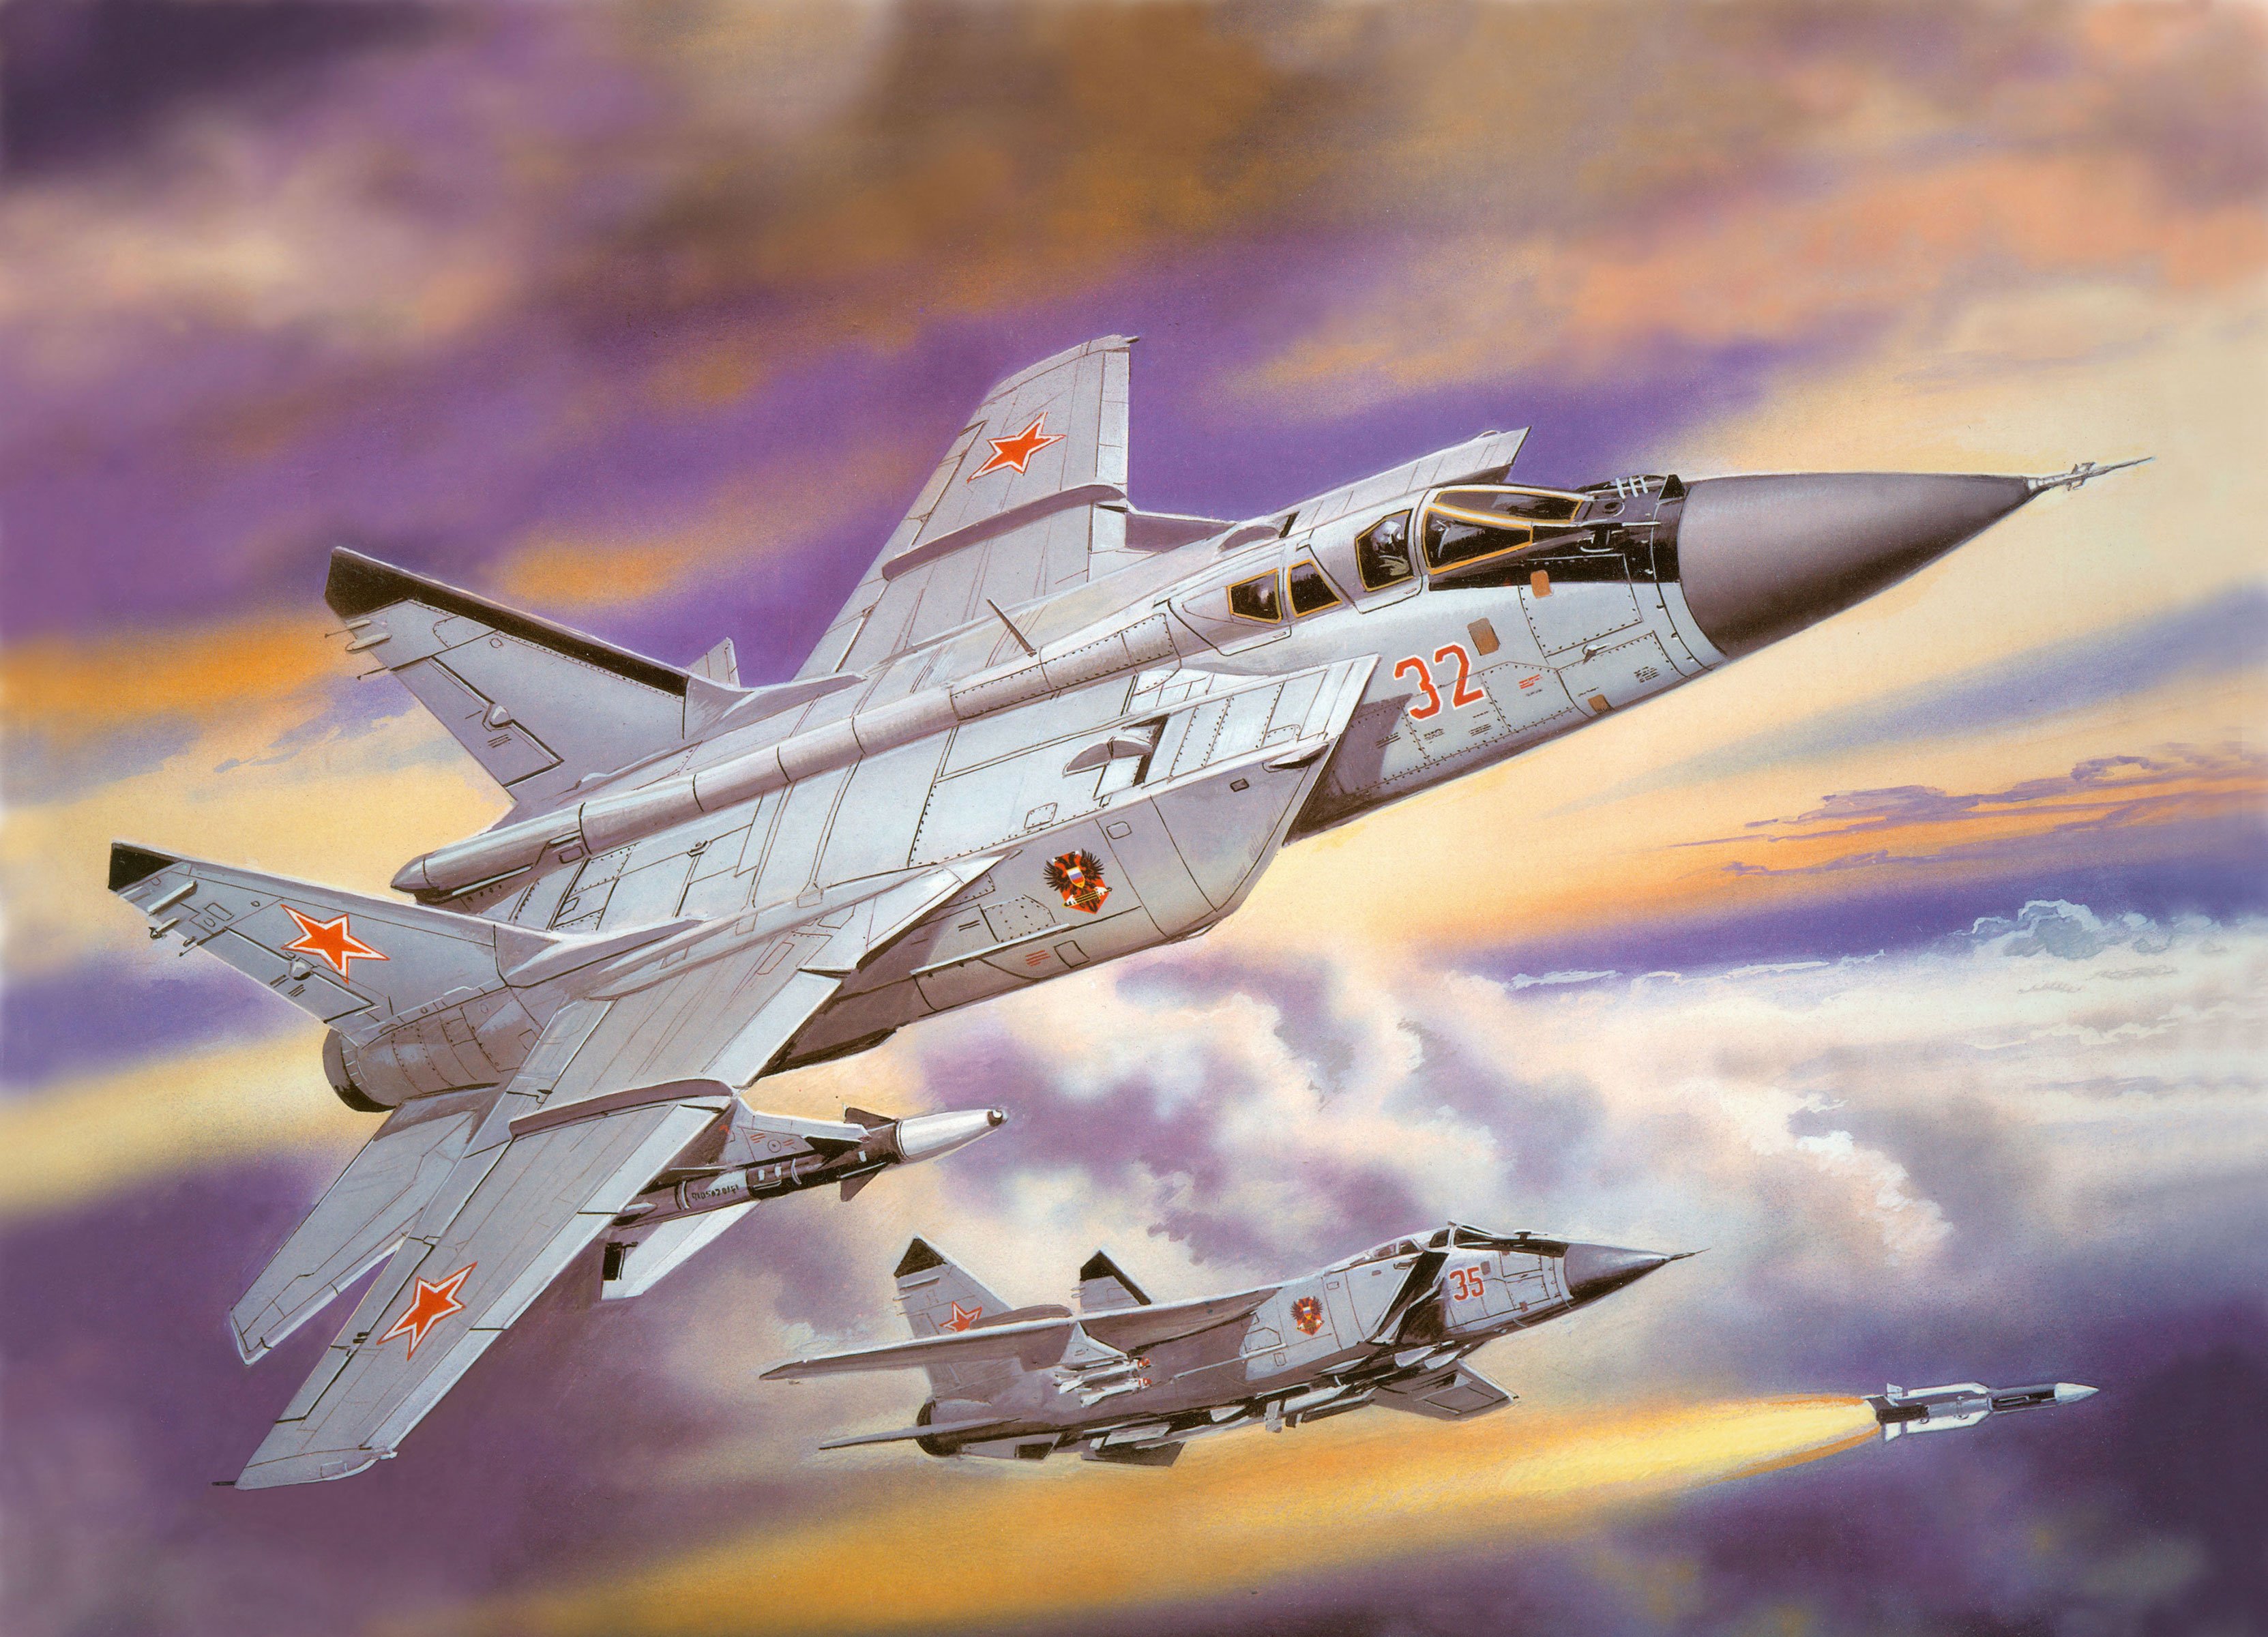 mig 31, Fighter, Jet, Military, Airplane, Plane, Russian, Mig,  21 Wallpaper